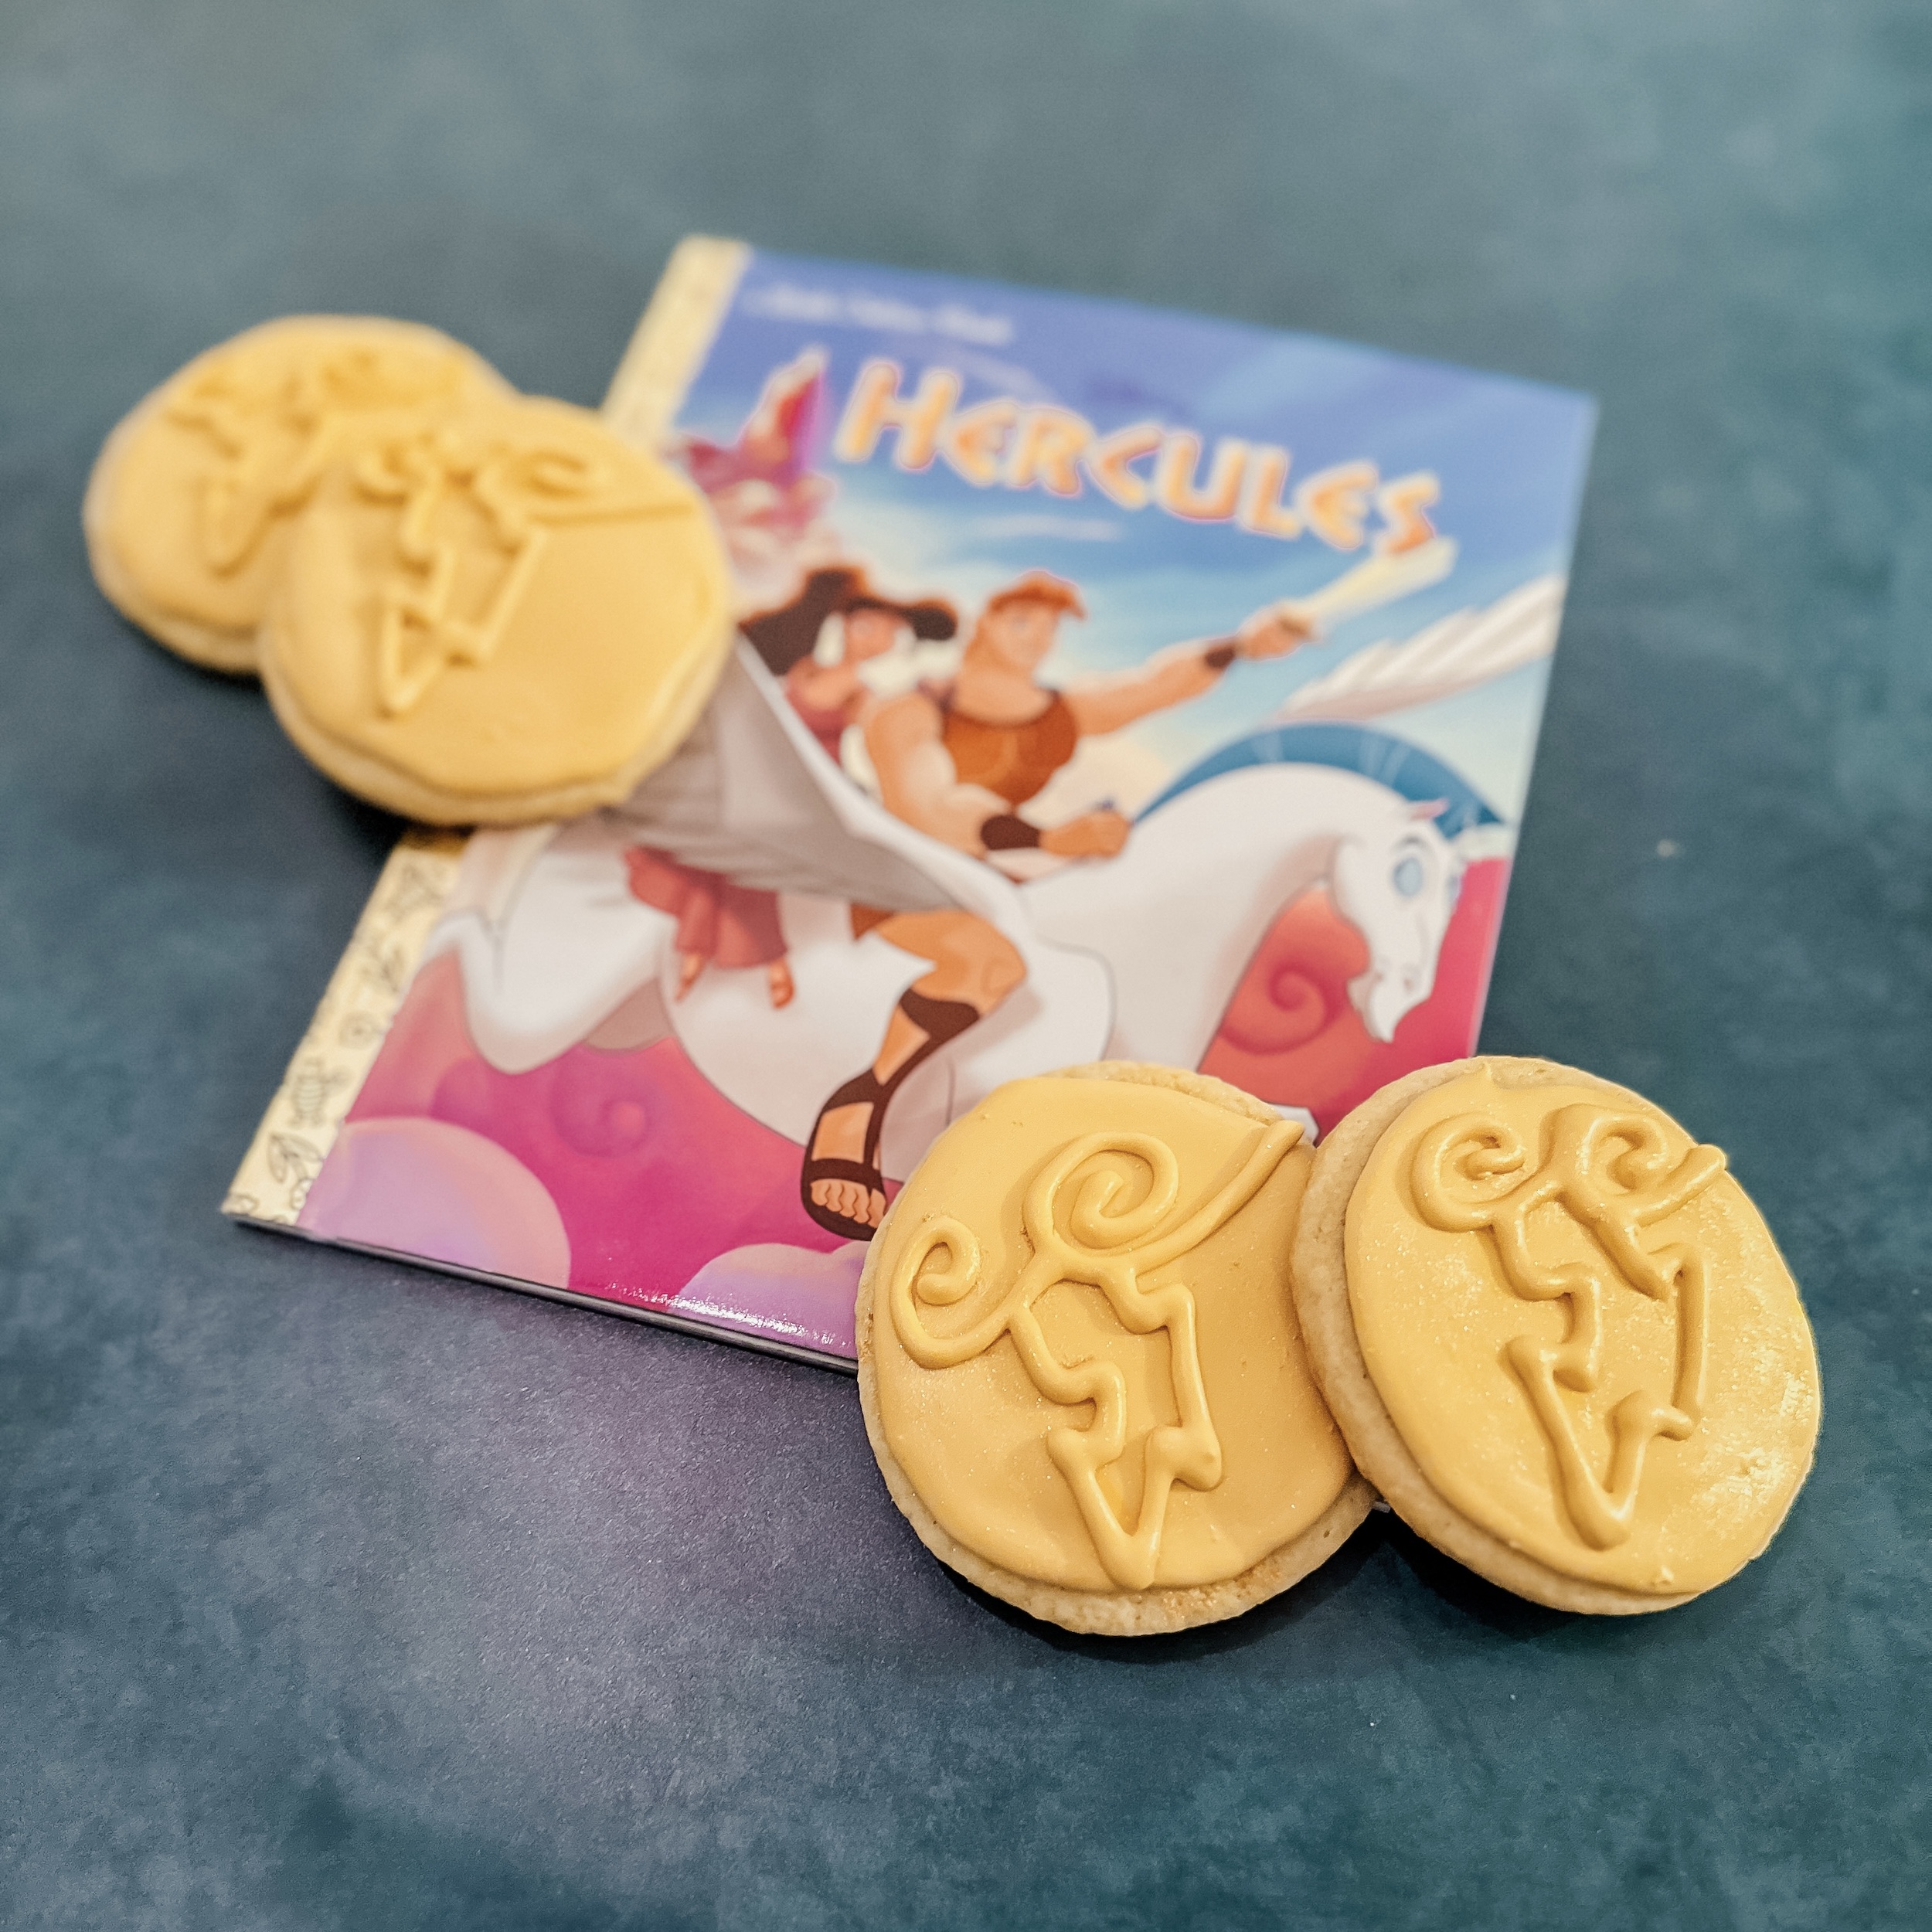 Hercules' Medal of the Gods Cookies (Sugar cookies with gold royal icing and a piped design of clouds and a lightning bolt)